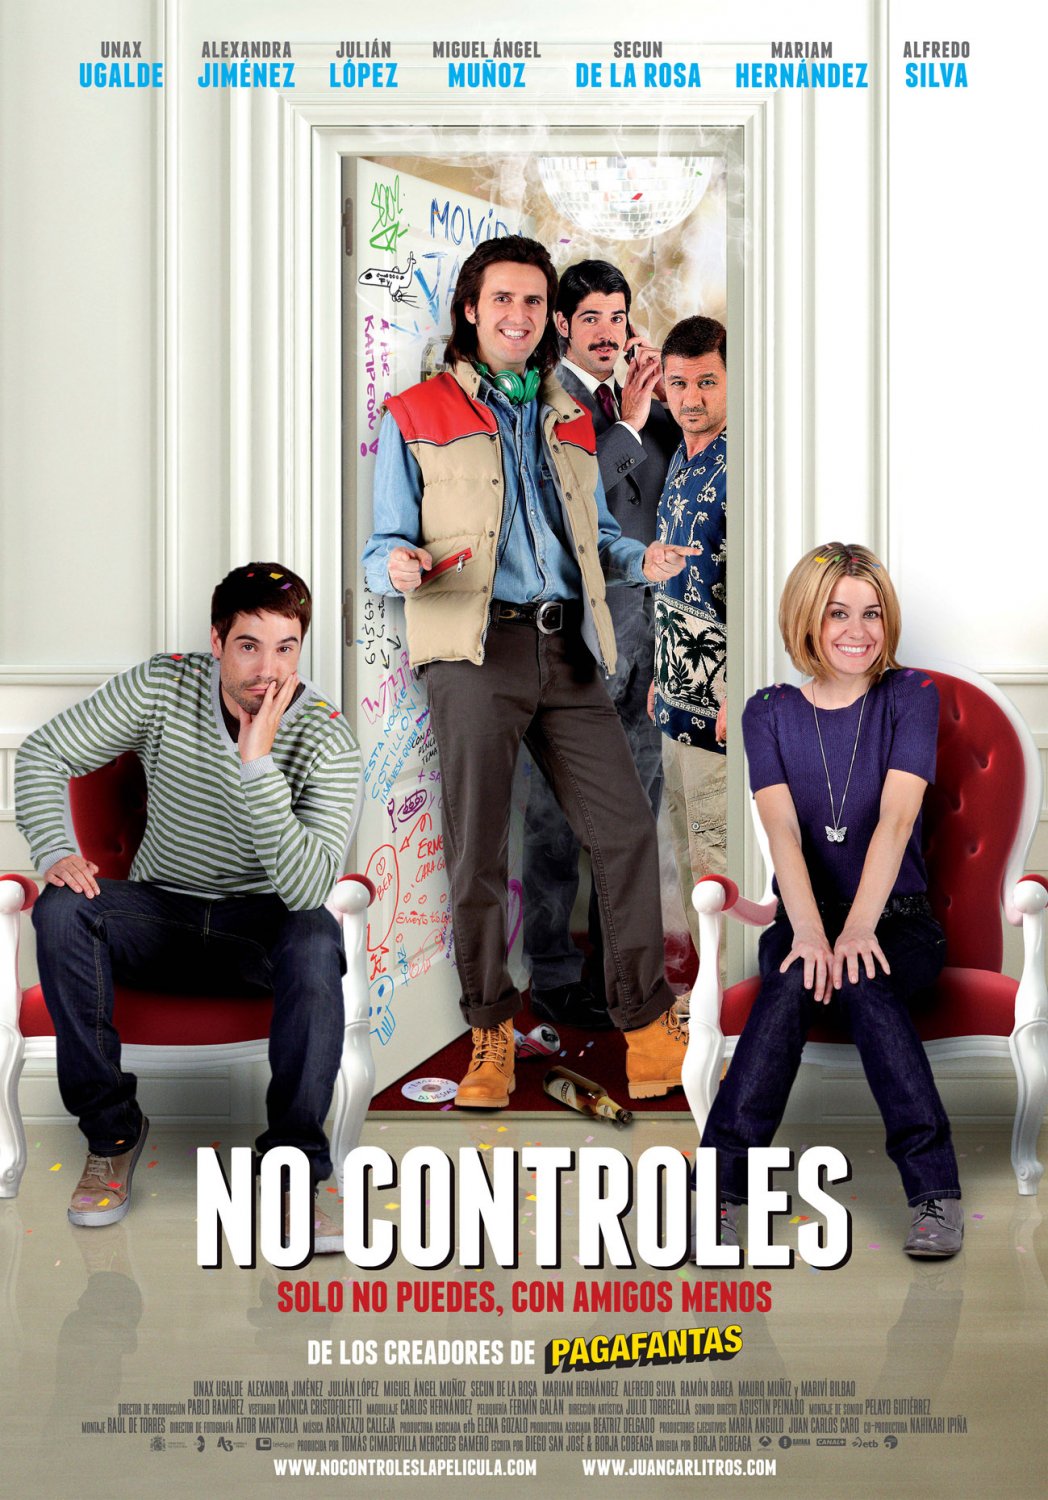 Extra Large Movie Poster Image for No controles (#7 of 7)